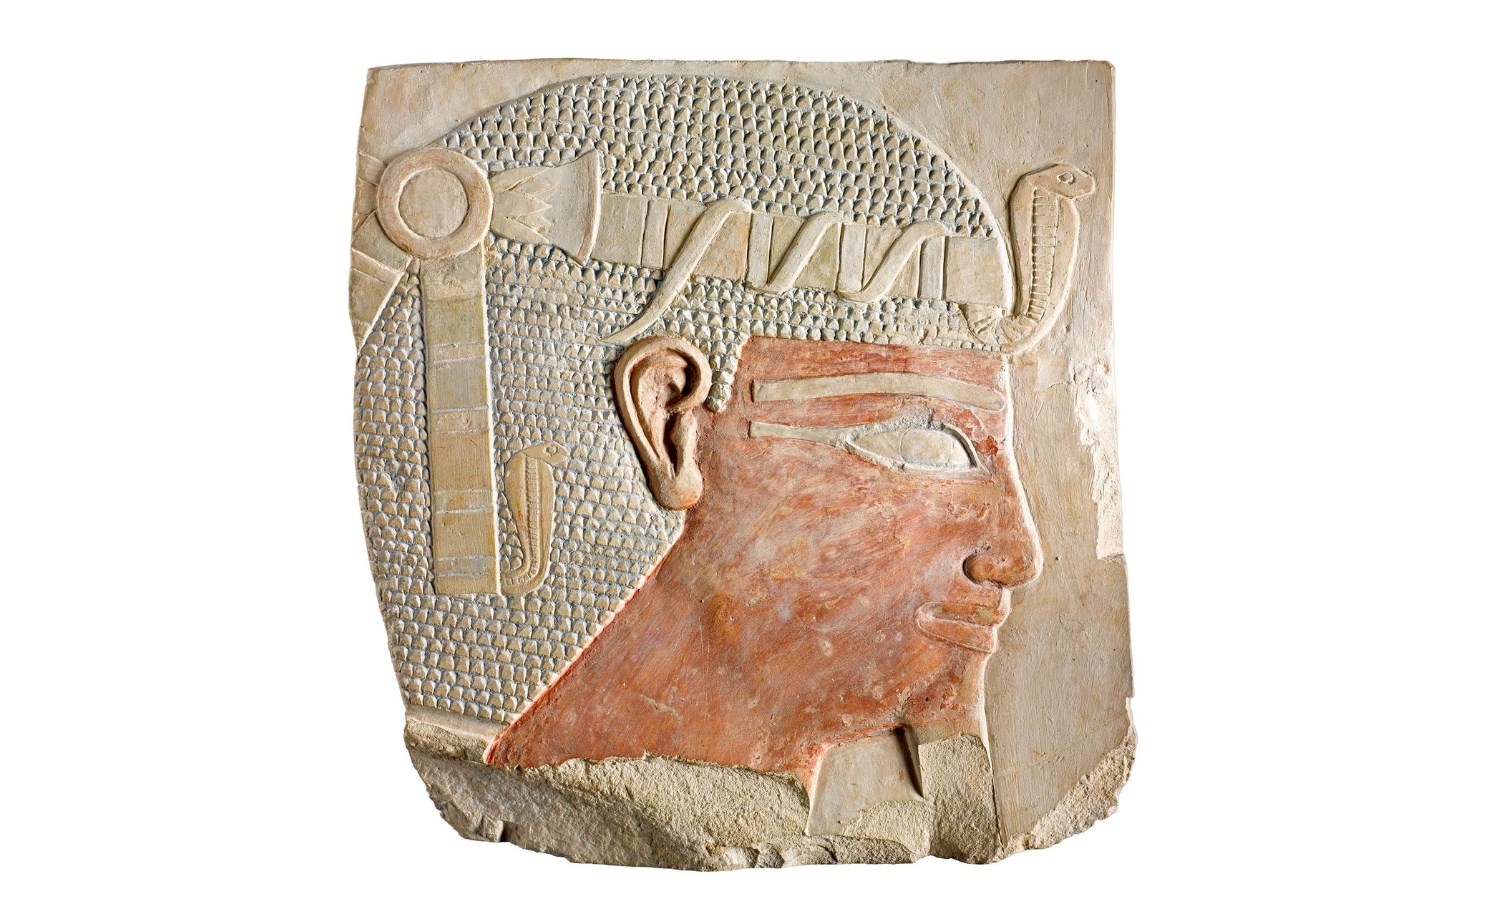 Relief on limestone showing the crowned head of a male Egyptian ruler. His hair is densely patterned with small triangles, and his crown has a cobra at the front.